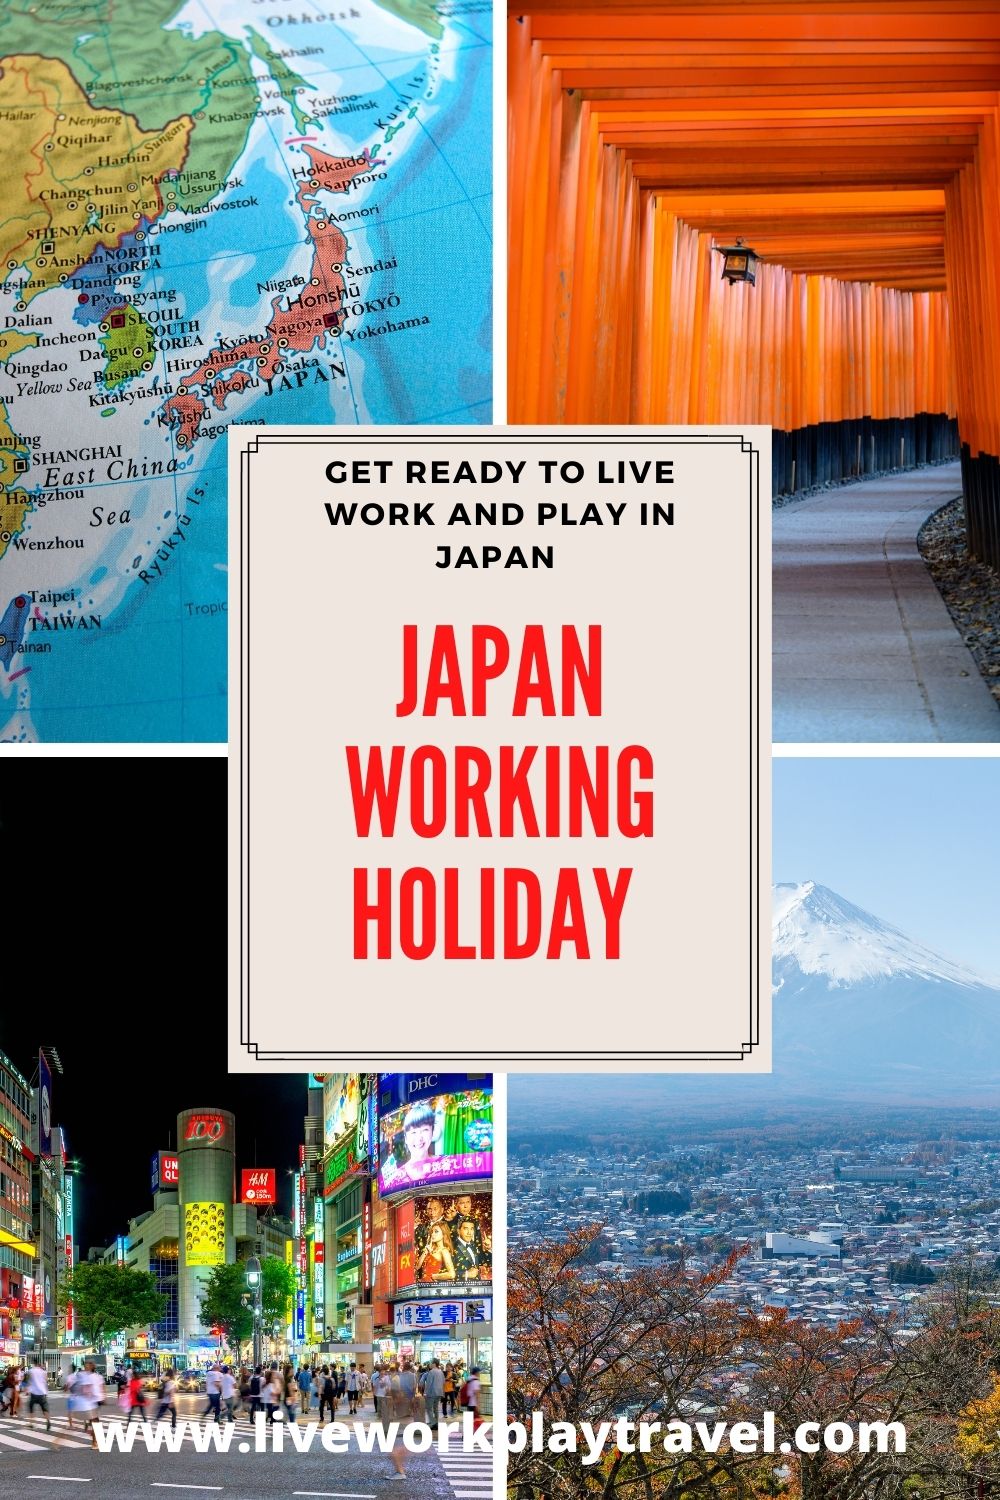 Japan Has Many Facets. Mount Fuji. Tori Gates. People Rushing Around Tokyo. Find Out On A Working Holiday In Japan.